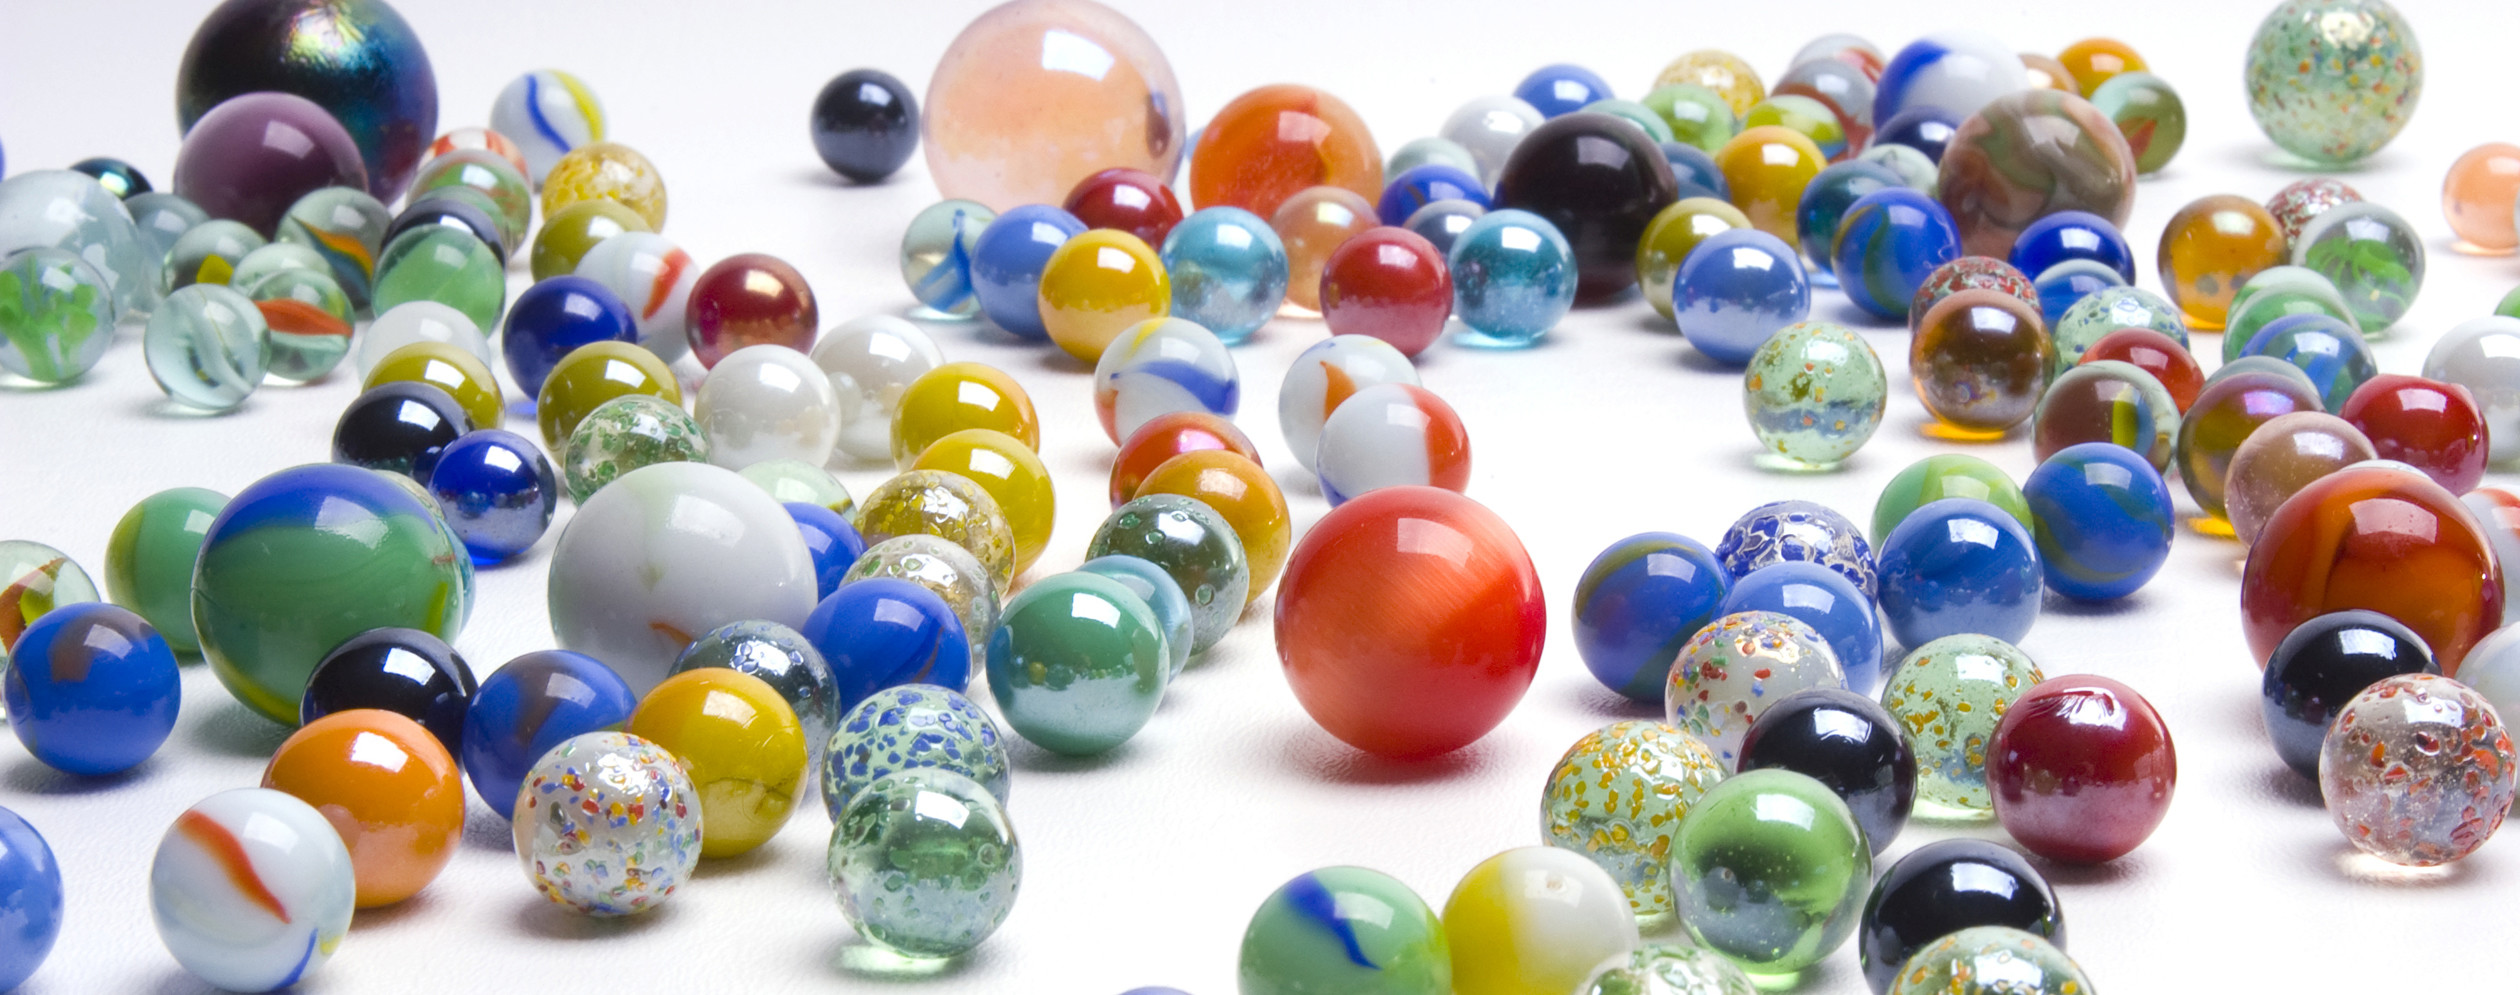 Marbles on a table